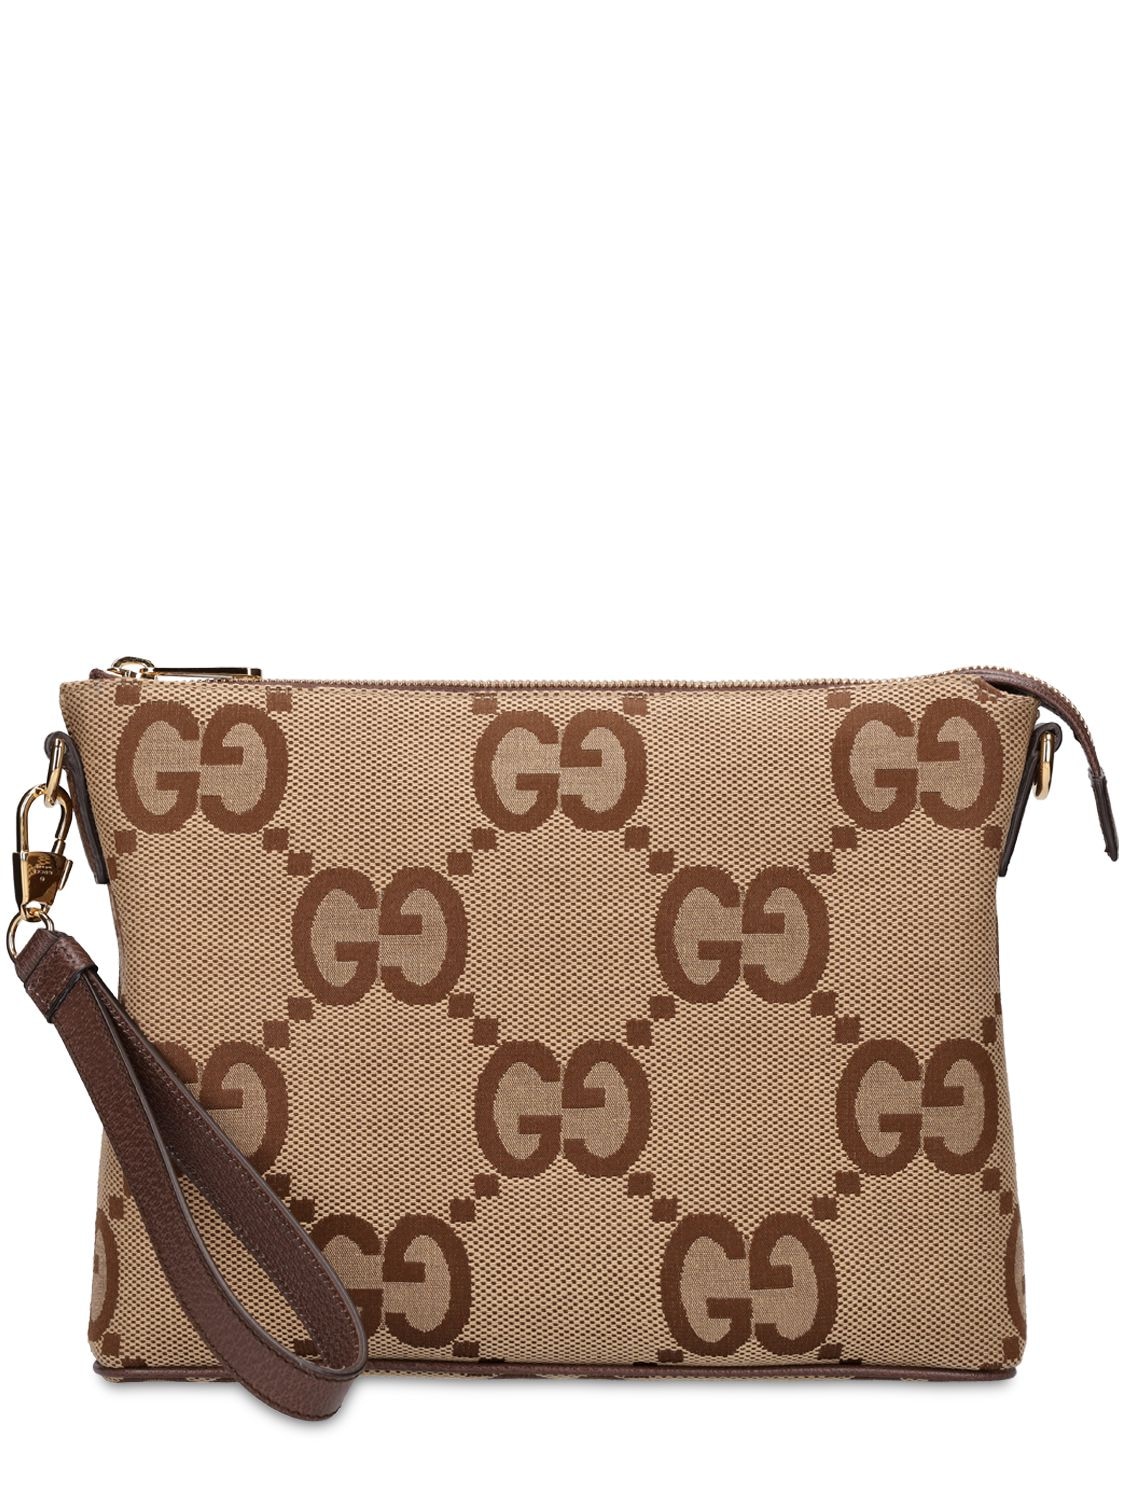 GUCCI Jumbo Gg canvas messenger bag - Realry: Your Fashion Search Engine